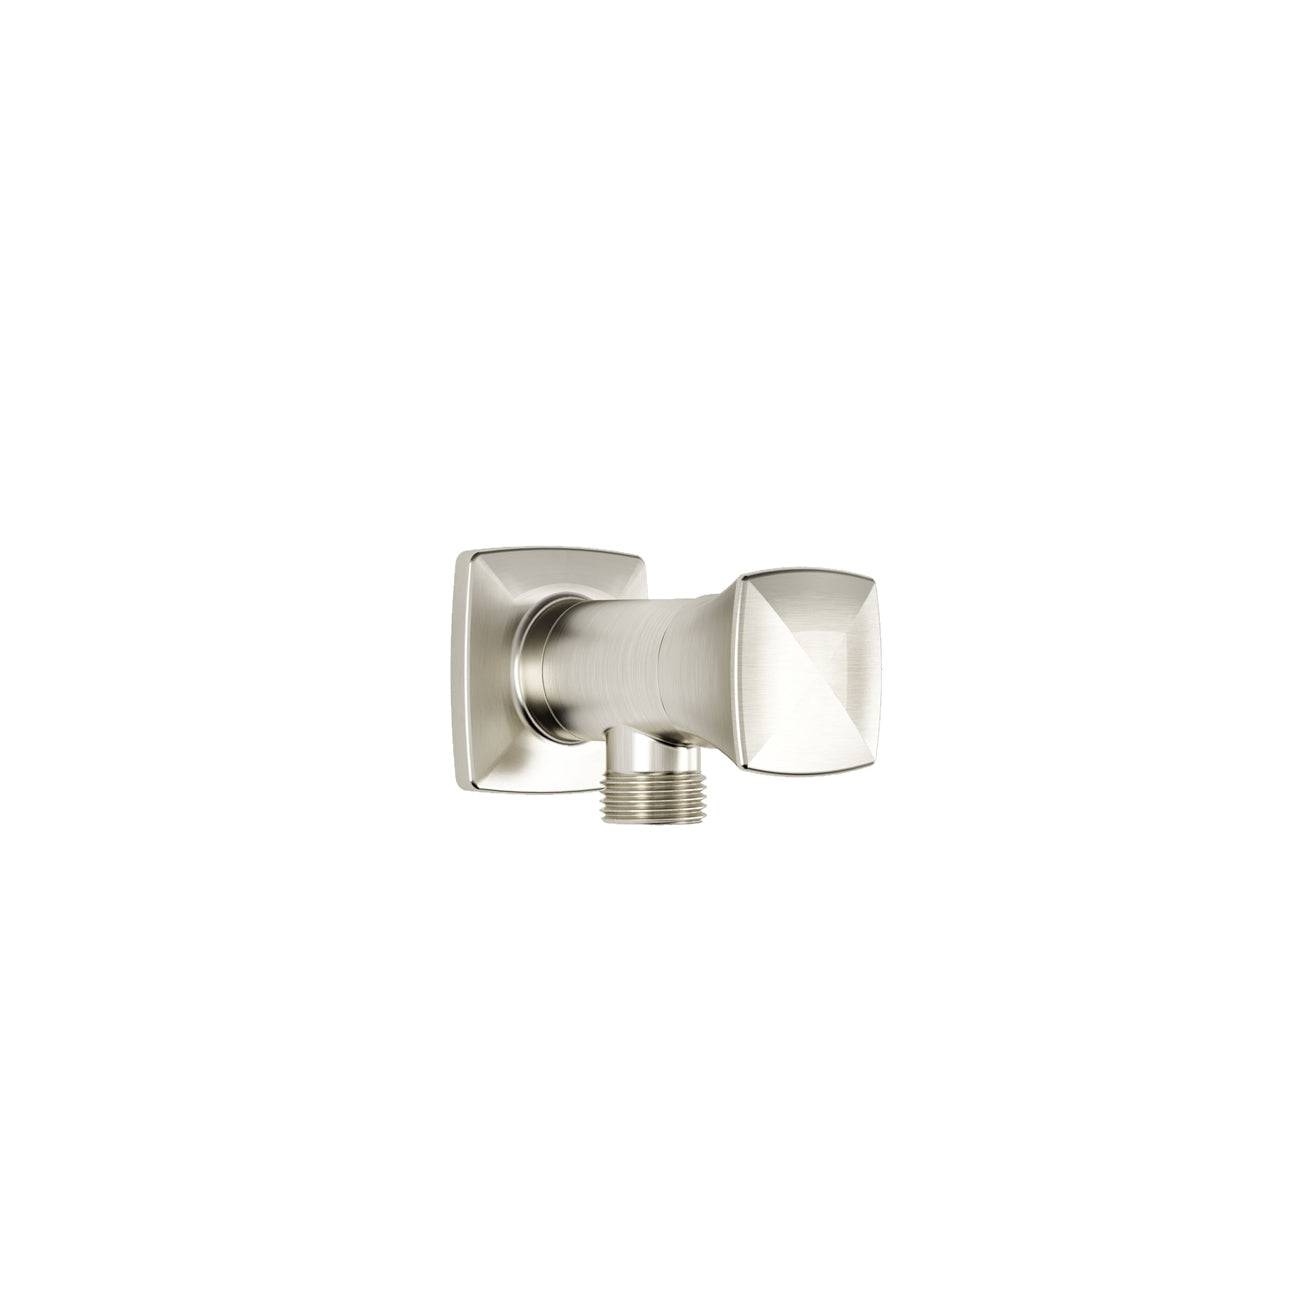 Kalia UMANI Shower Wall Outlet with Volume Control- Brushed Nickel